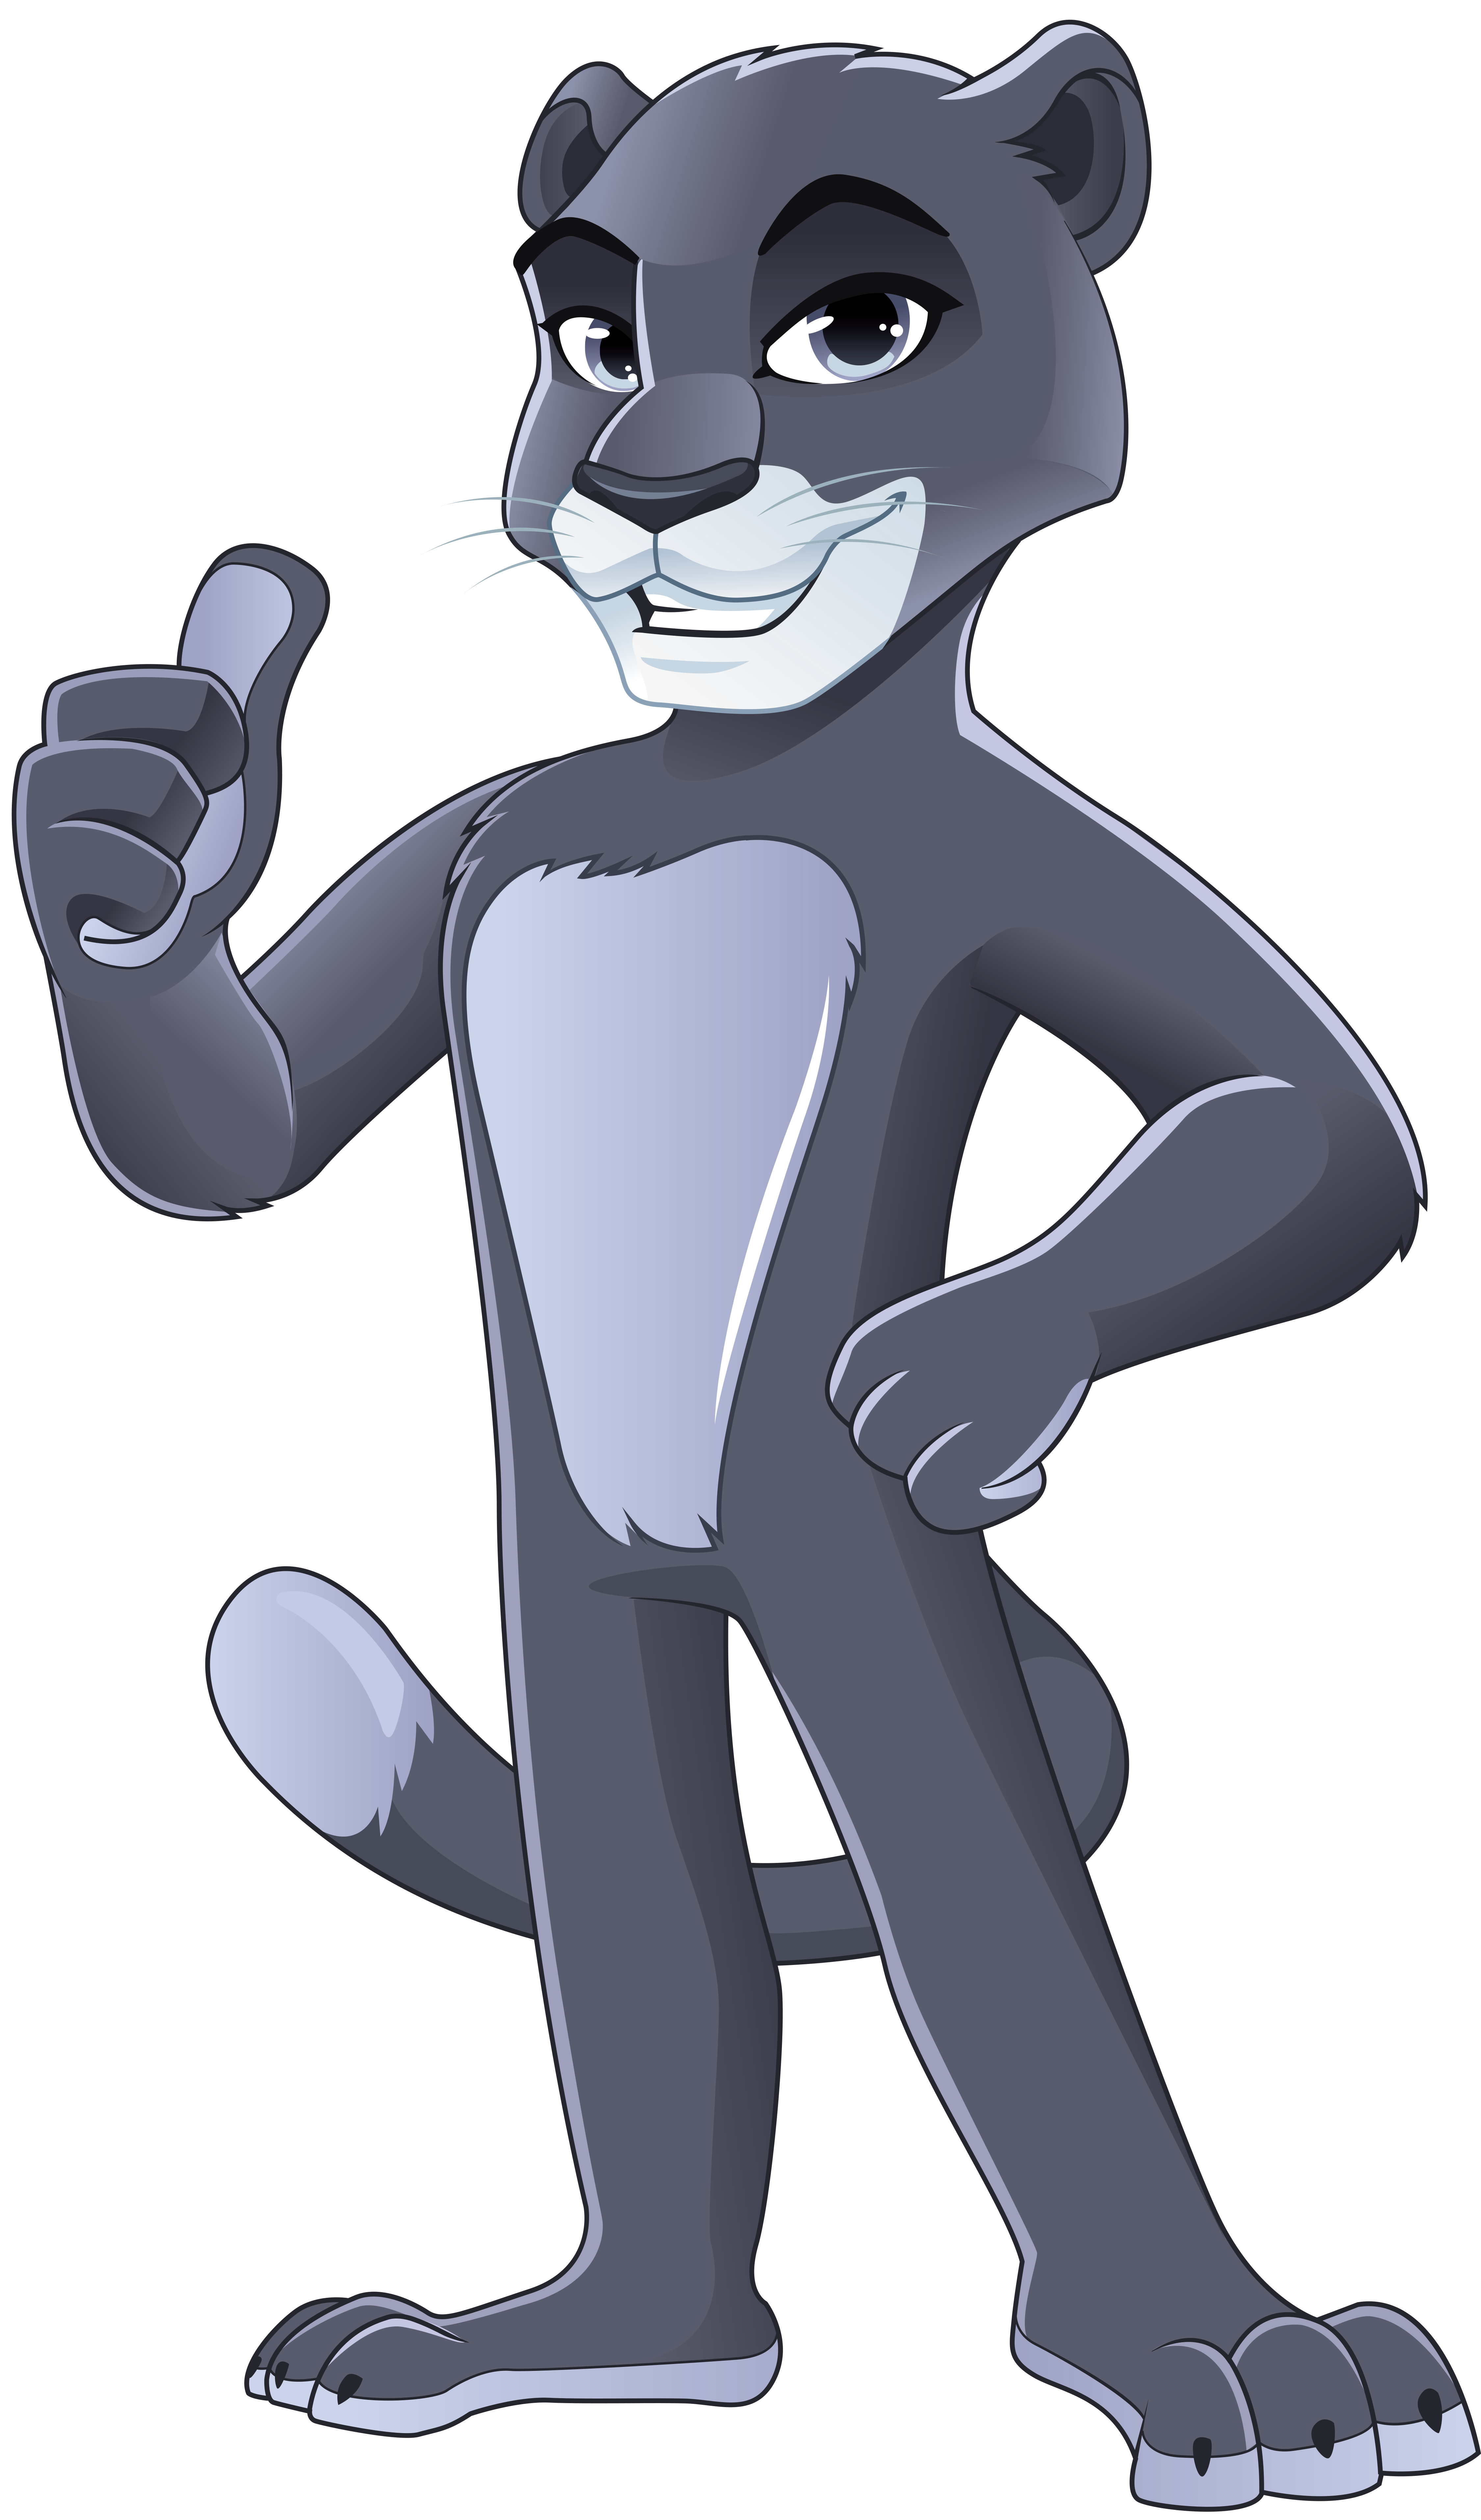 panther clipart panther mascot